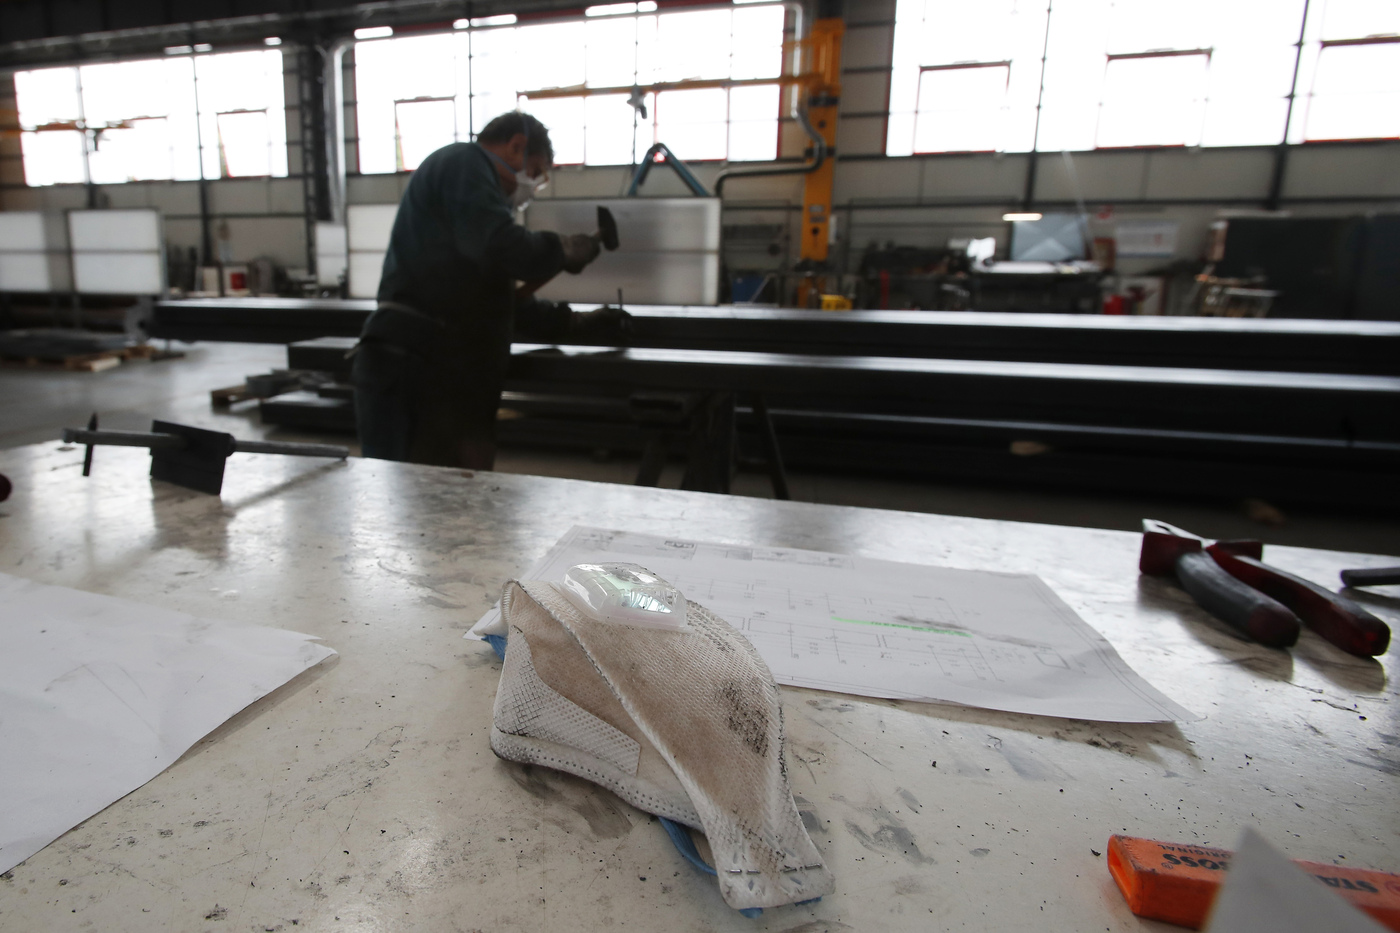 A safety mask lies on he table along with other instruments at MAP, a factory operating in design, manufacture and installation of steel structures for civil and industrial use, in Corsico, near Milan, Italy, Wednesday, May 6, 2020. Italy began stirring again after the coronavirus shutdown, with 4.4 million Italians able to return to work and restrictions on movement eased in the first European country to lock down in a bid to stem COVID-19 infections. (AP Photo/Antonio Calanni)